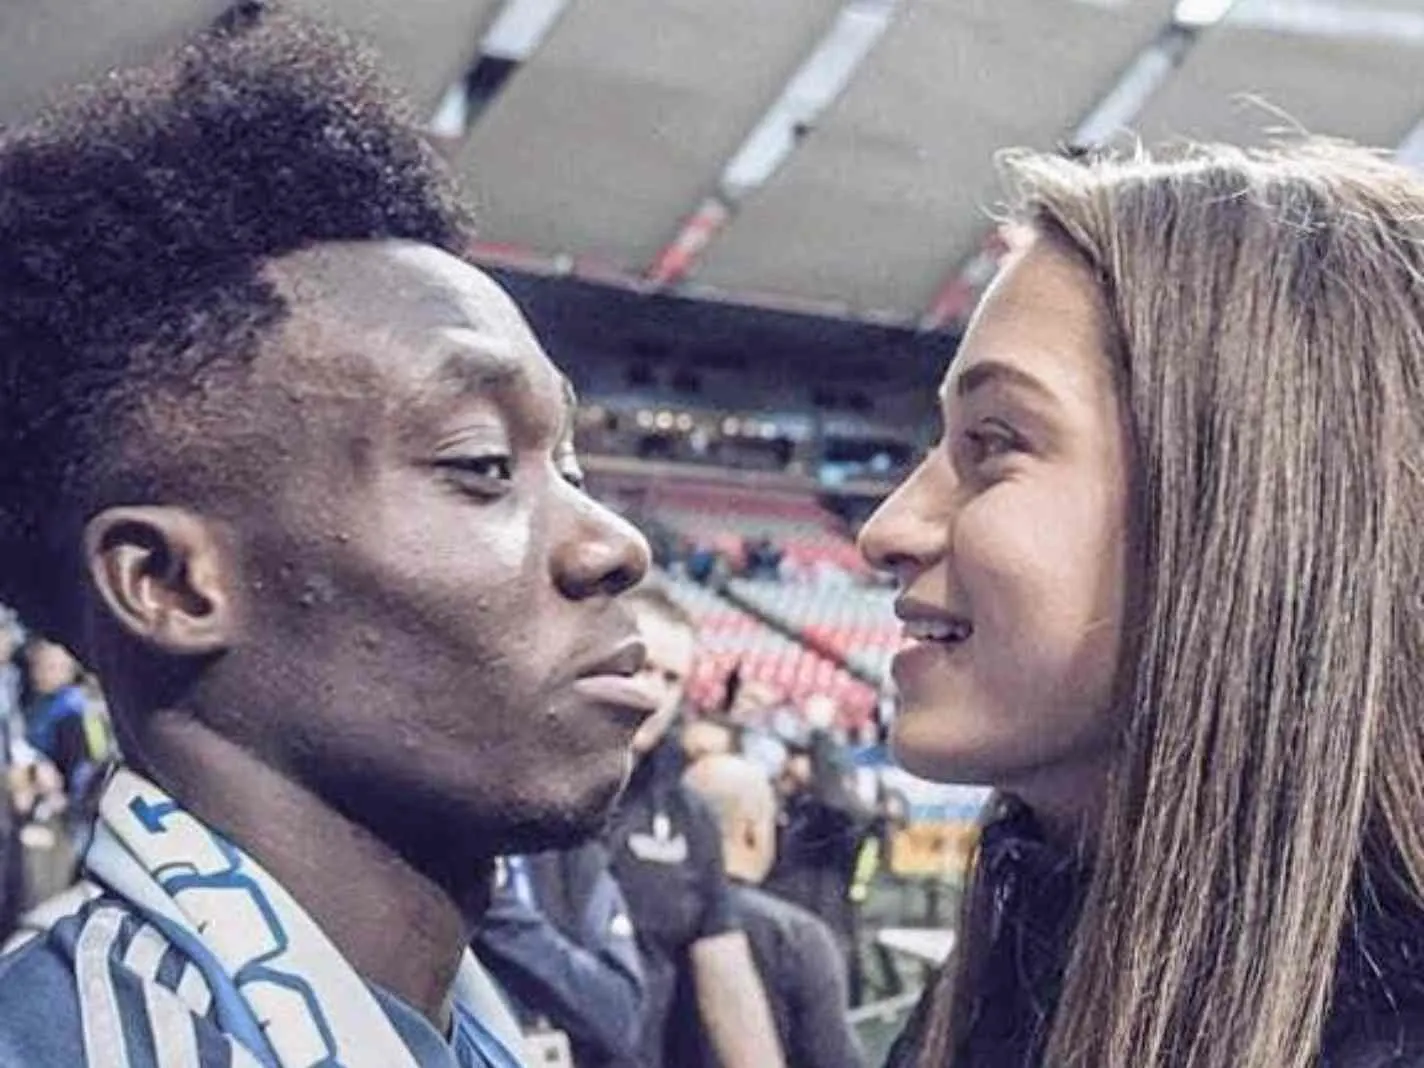 The photo shows Alphonso Davies and Jordyn Huitema together.